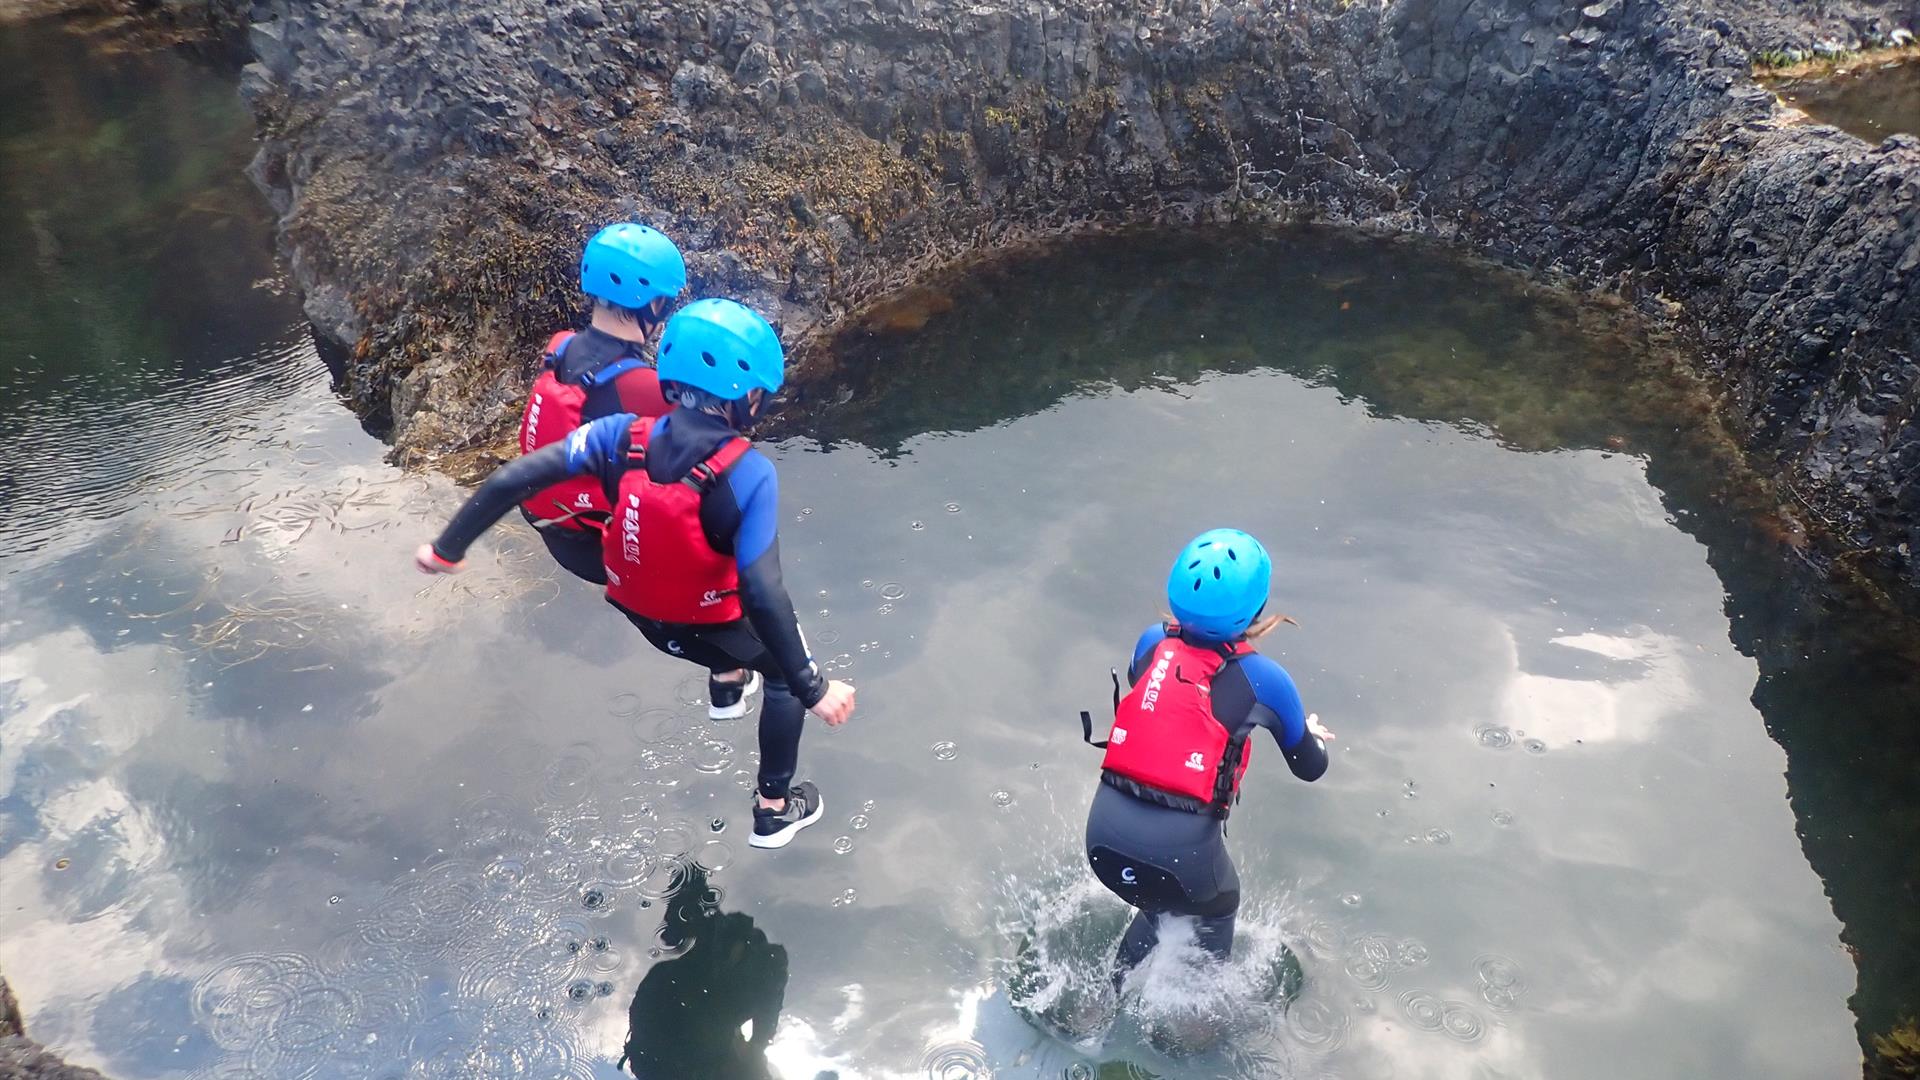 Three young children jumping into rock pool wearing helmets and buoyancy aids